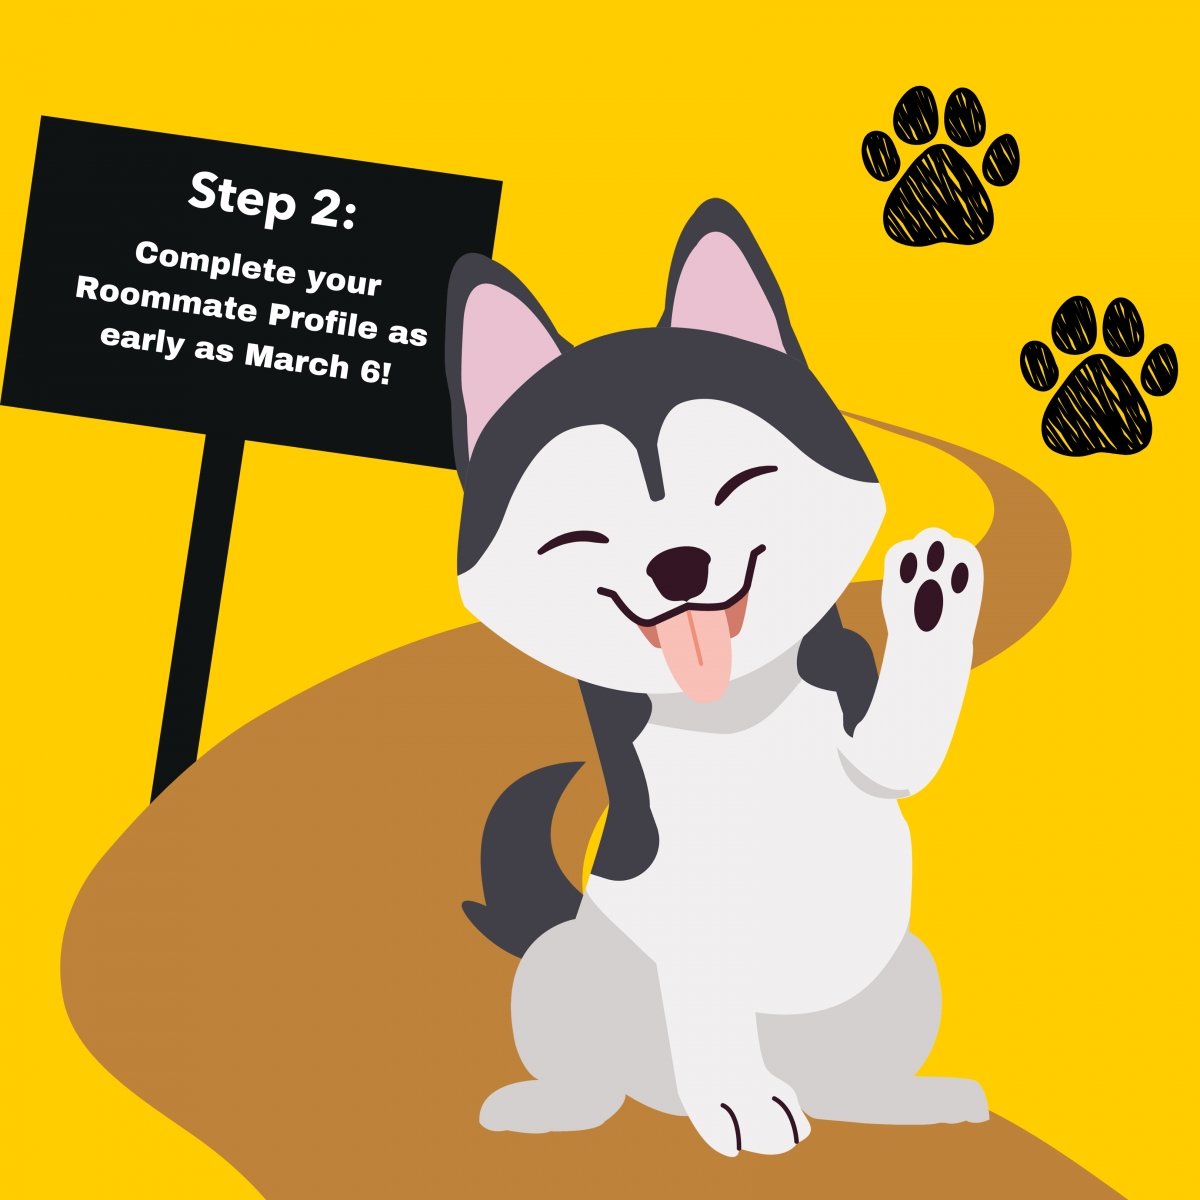 Husky on a trail with sign in the background. Step 2: Complete your Roommate Profile as early as March 6! 